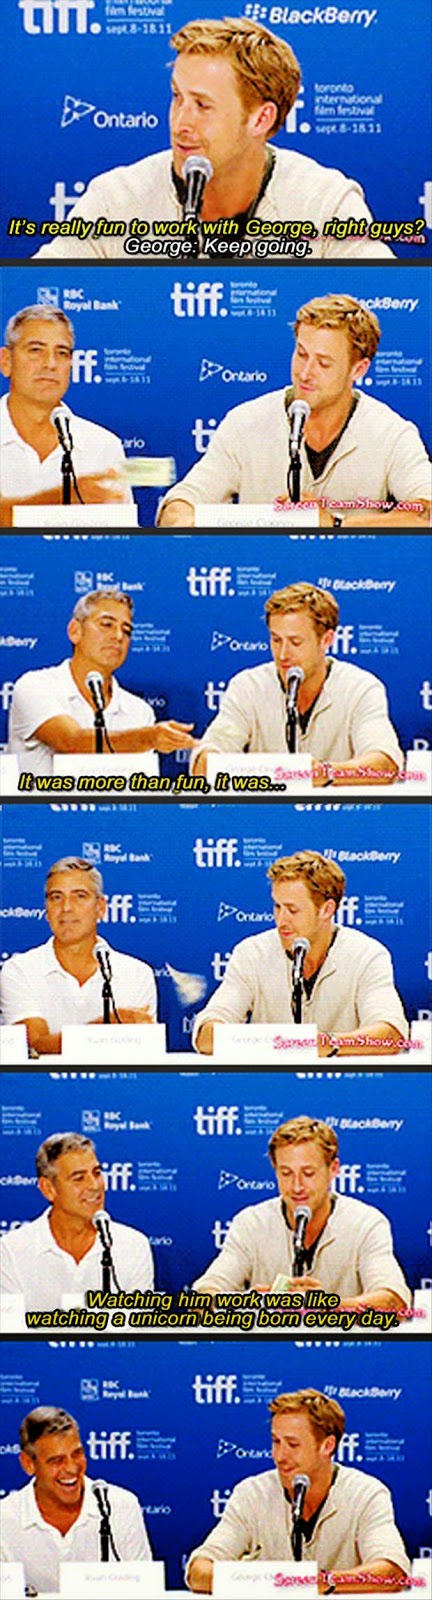 george-clooney-and-ryan-gosling-funny-interview.jpg